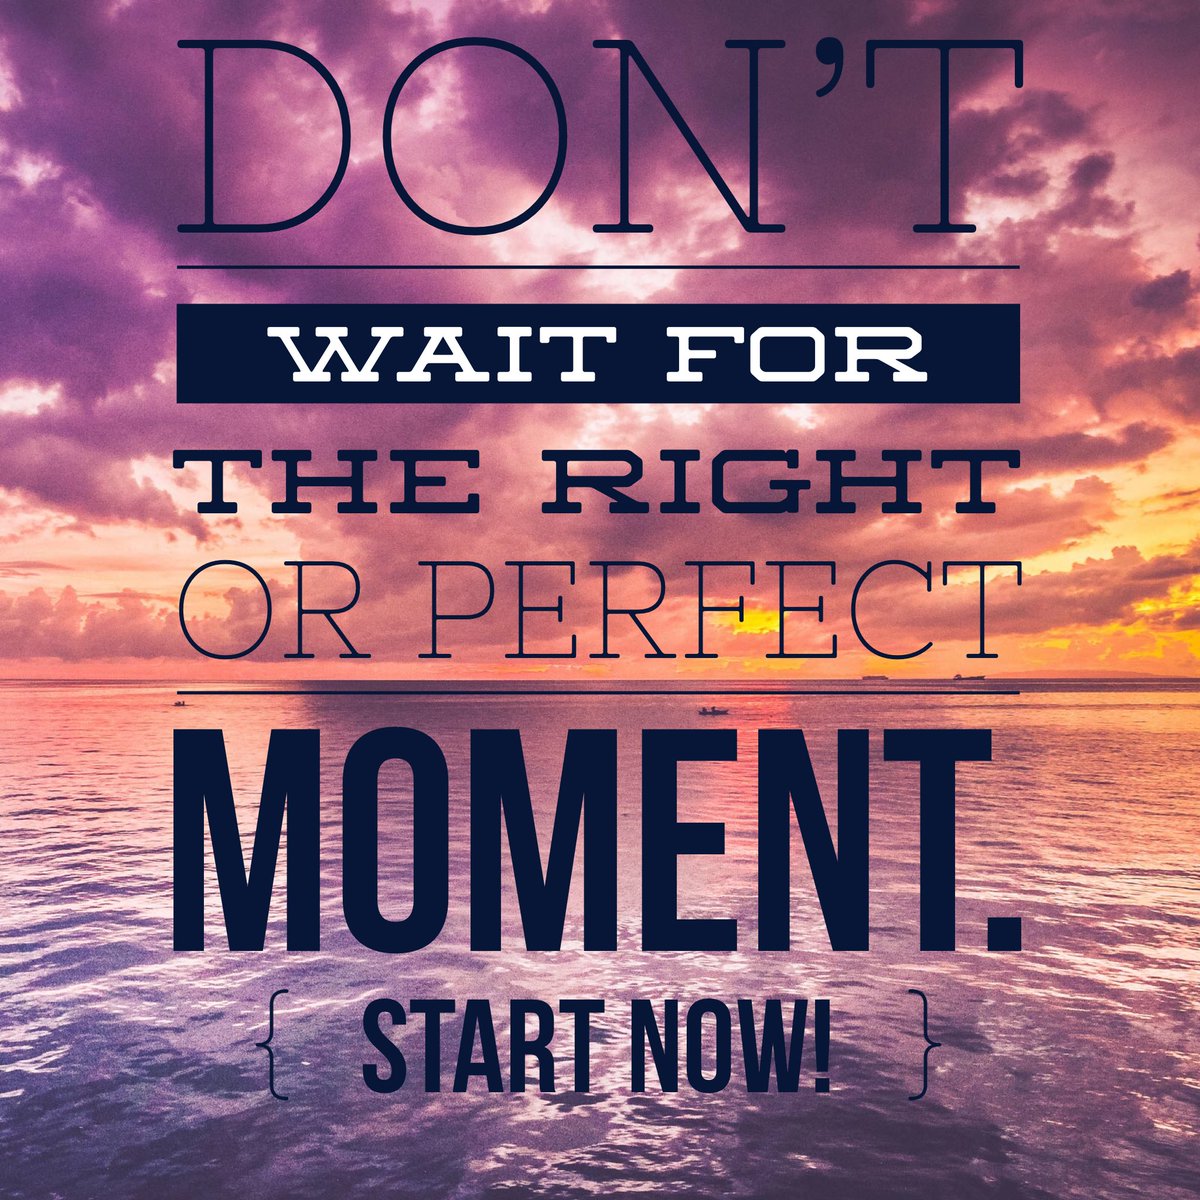 Don’t wait for the right or perfect moment. START NOW! #start #go #hustle #winning #perfectionisoverrated #change #mindset #supplychain #supplychainqueen